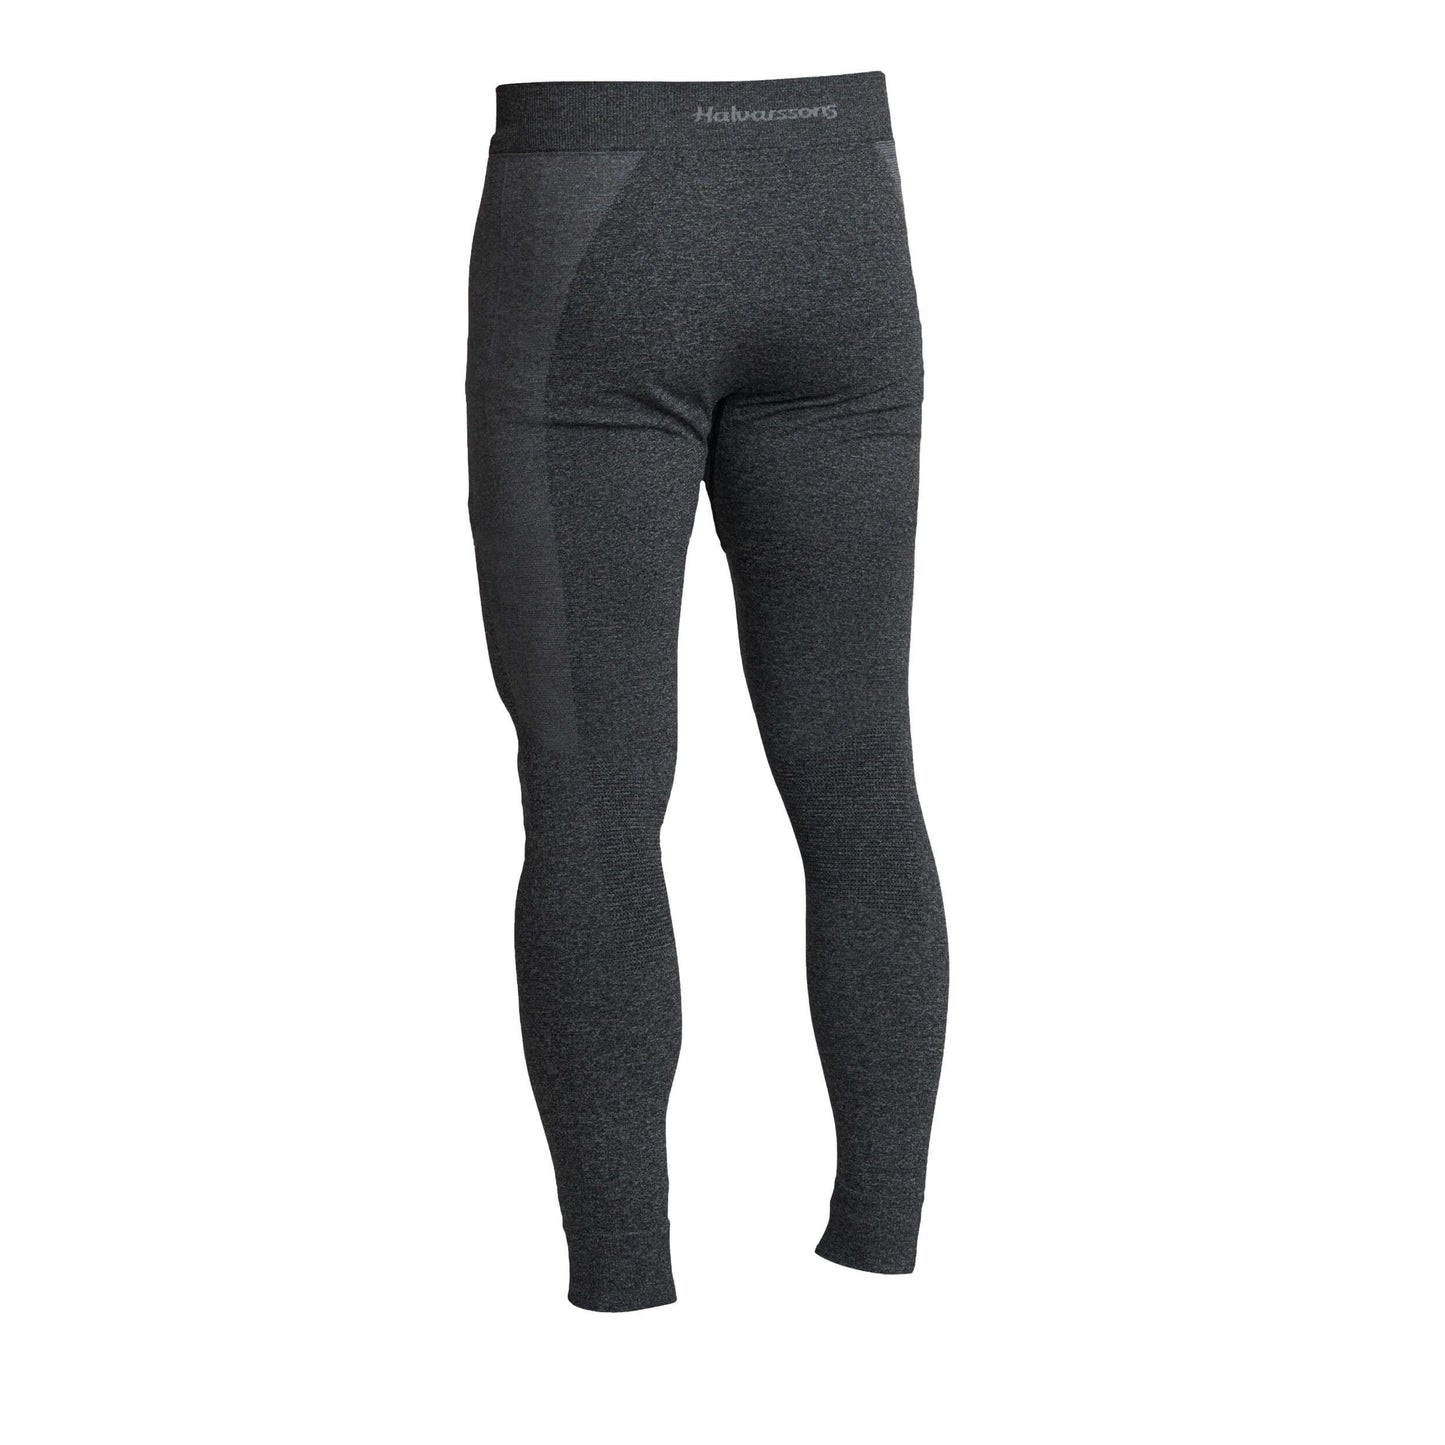 Halvarssons Core-knit longs, technical and light weight seamless base layer 